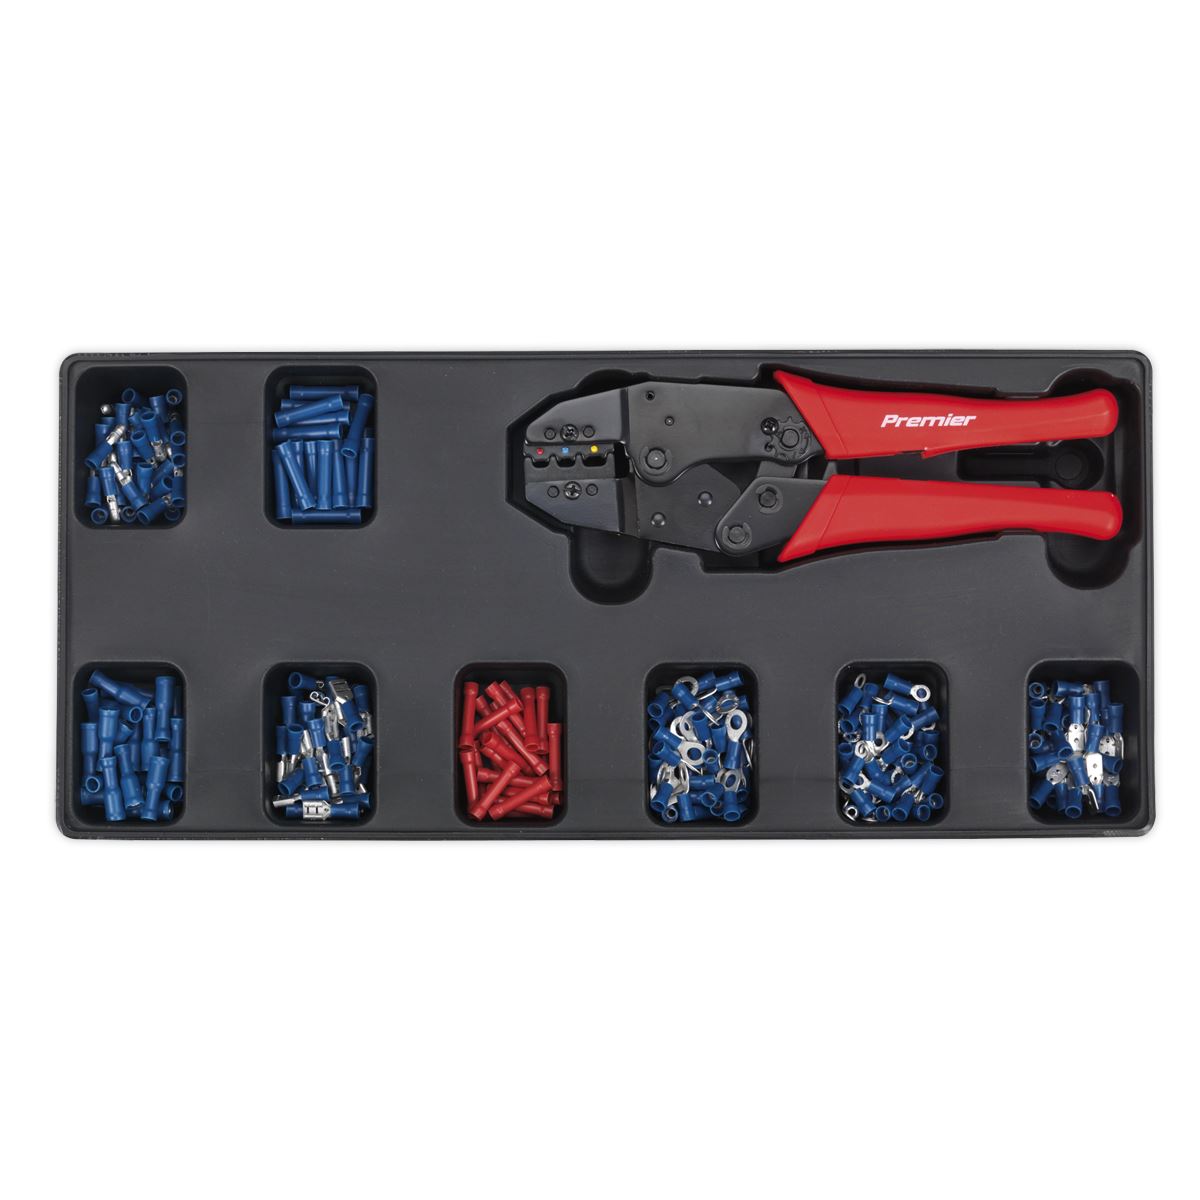 Sealey Premier Tool Tray with Ratchet Crimper & 325 Assorted Insulated Terminal Set